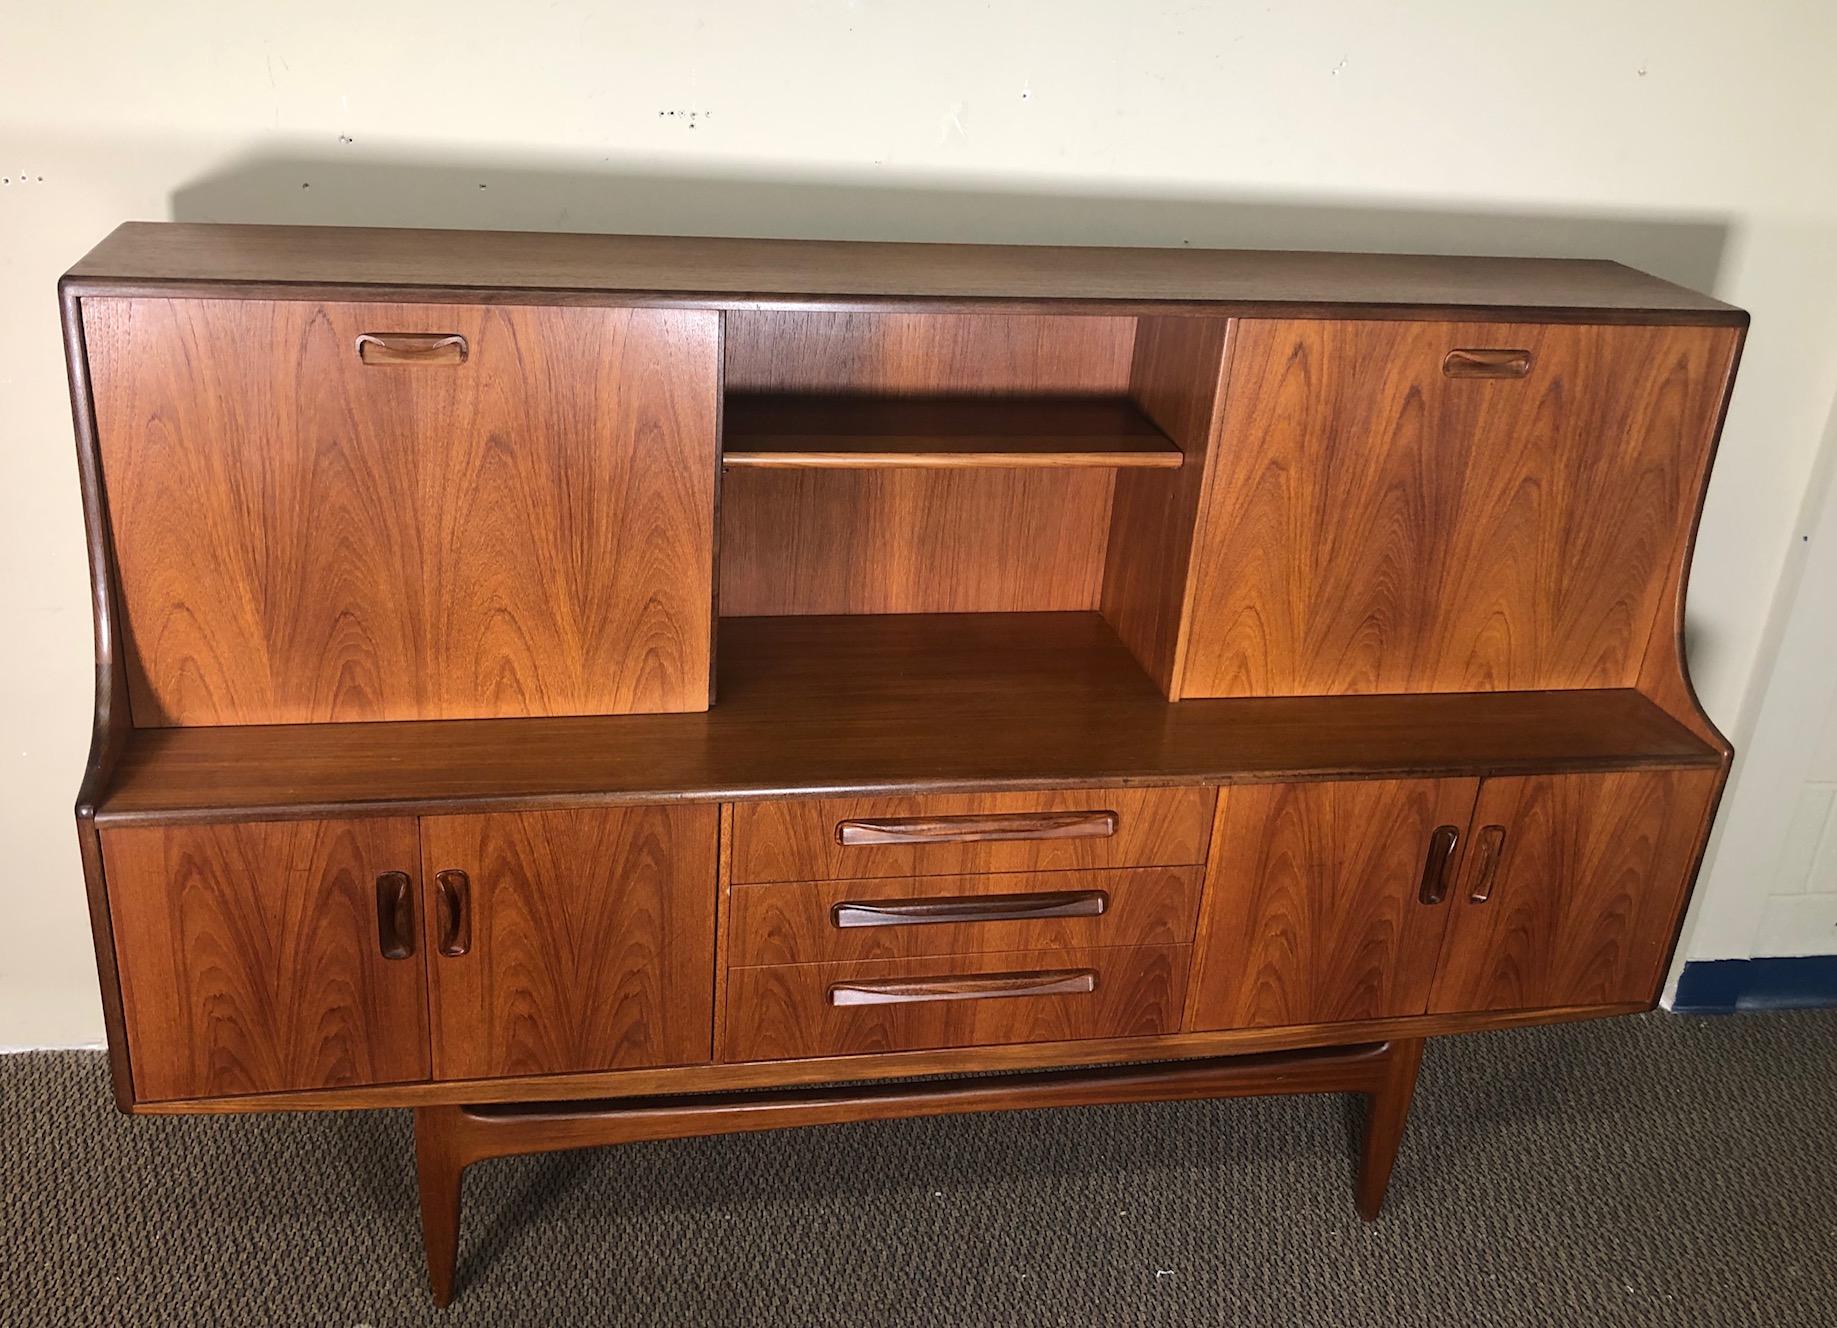 Mid-Century Modern versatile high board by G Plan. Featuring a sliding door and a small drop down desk that can comfortably hold a laptop or be used as a wine bar. Shelves are adjustable. Unfinished back.

Exceptionally nice wood grain on this